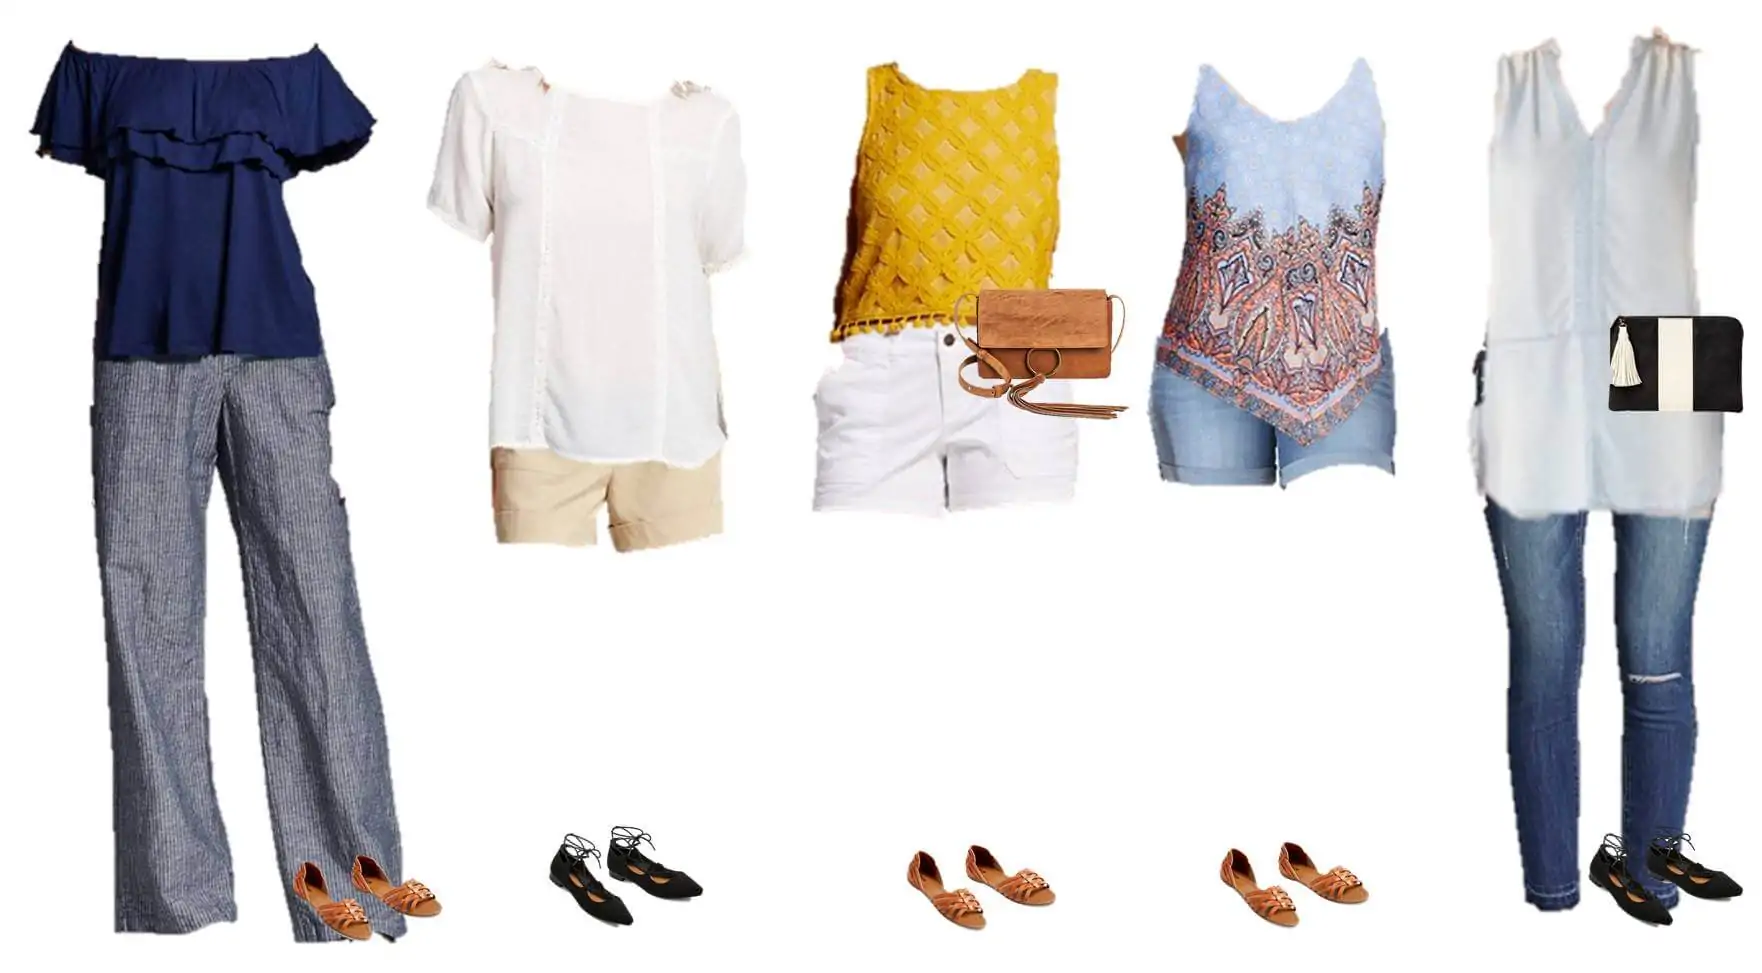 5.10 Mix and Match Fashion - Target Summer Styles 1-5